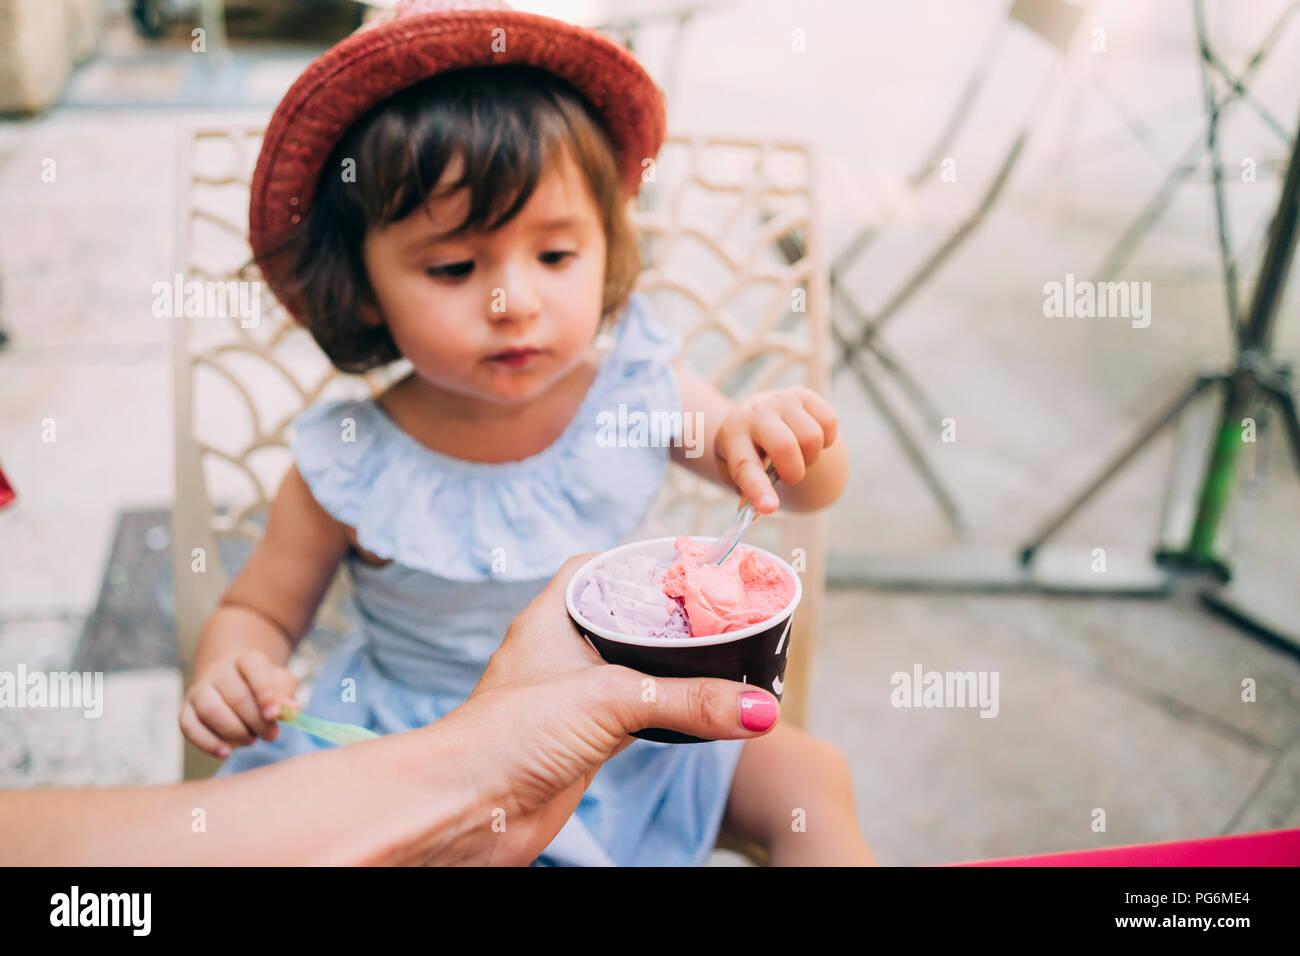 Cute toddler girl eating an ice cream held by her mother Stock Photo